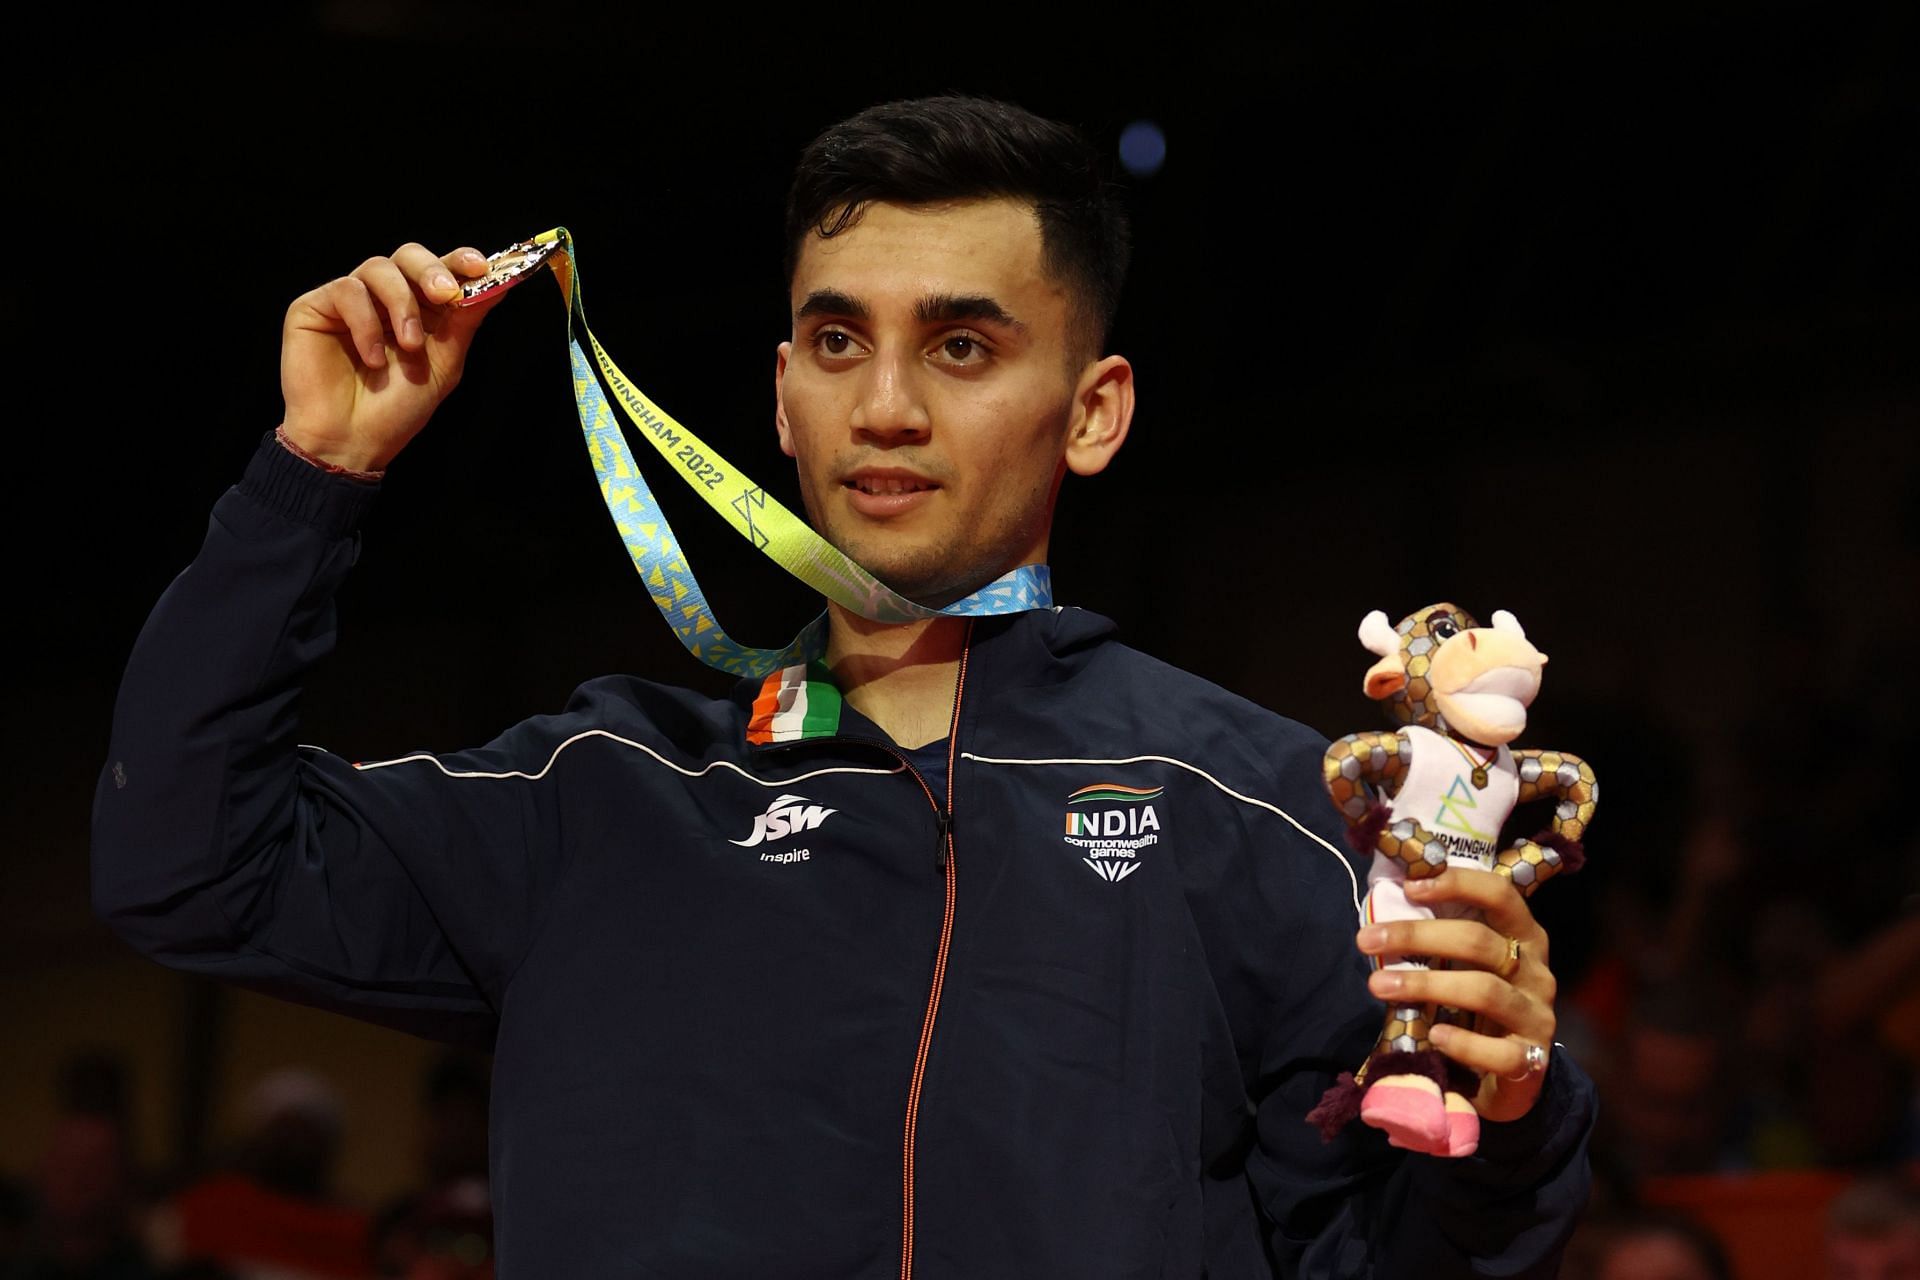 Indian badminton player Lakshya Sen with his CWG gold medal. (PC: Getty Images)